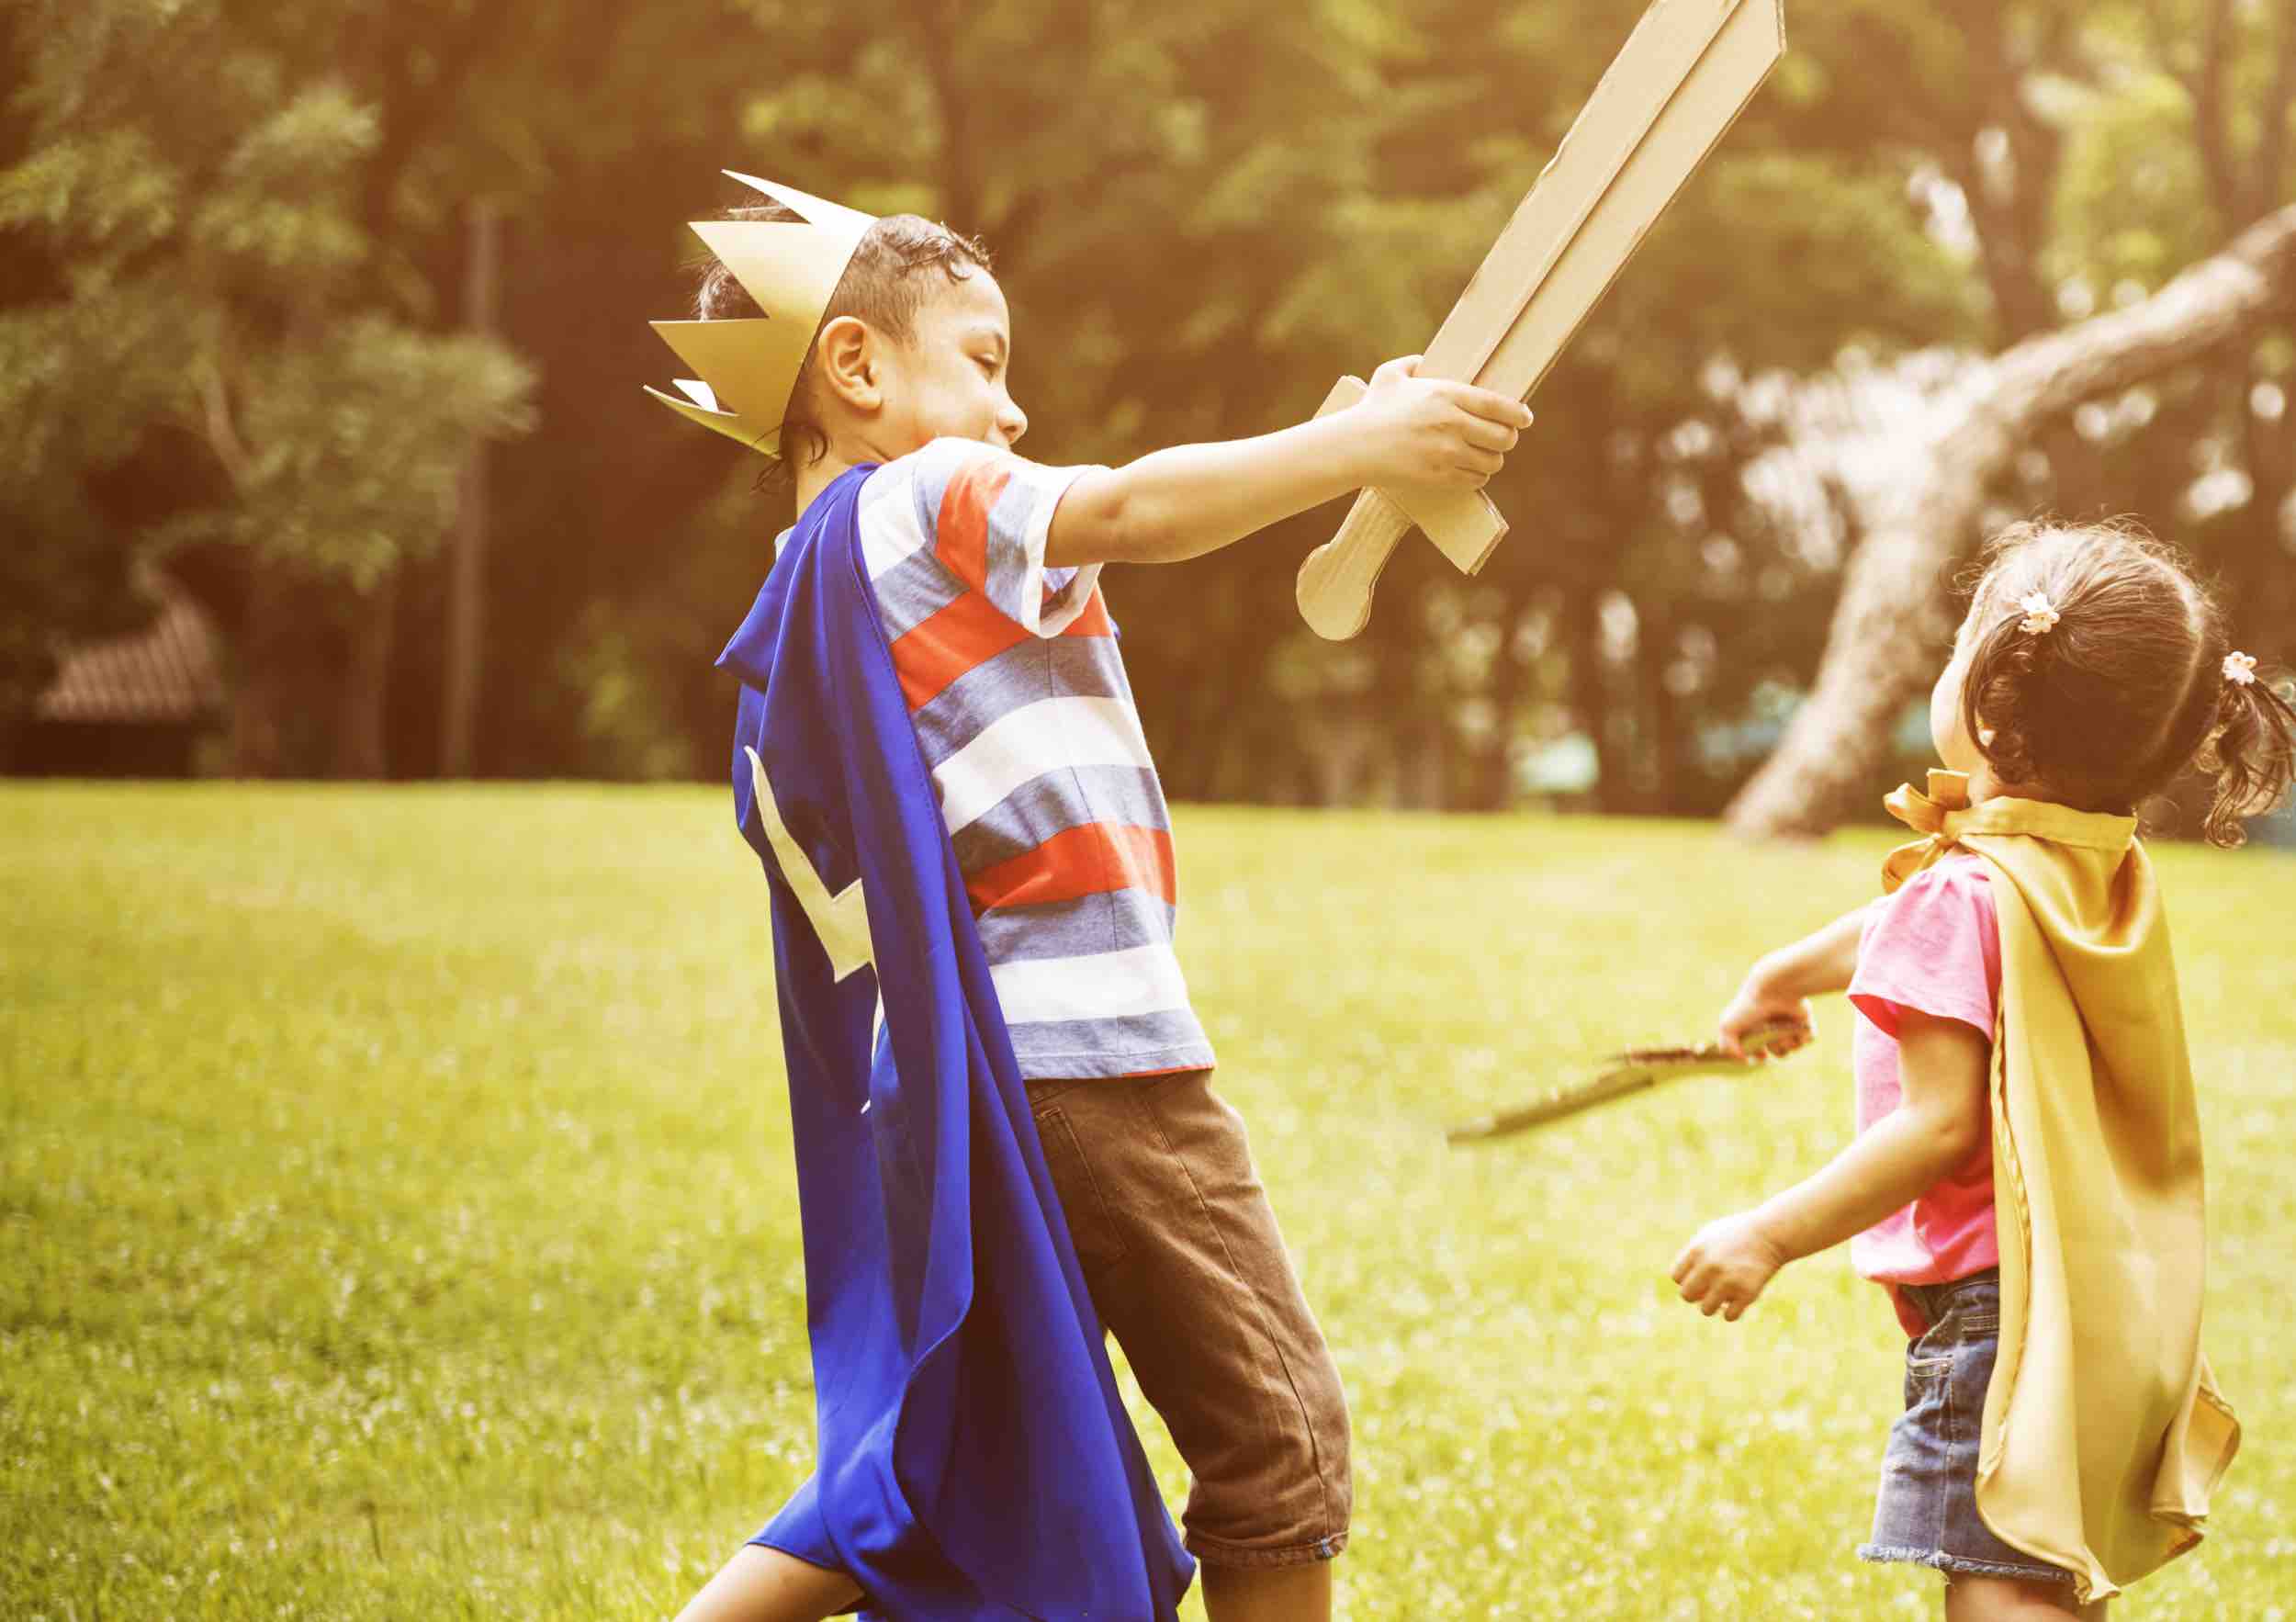 Boy with cardboard sword and king's crown and cape outside with little girl also with sword